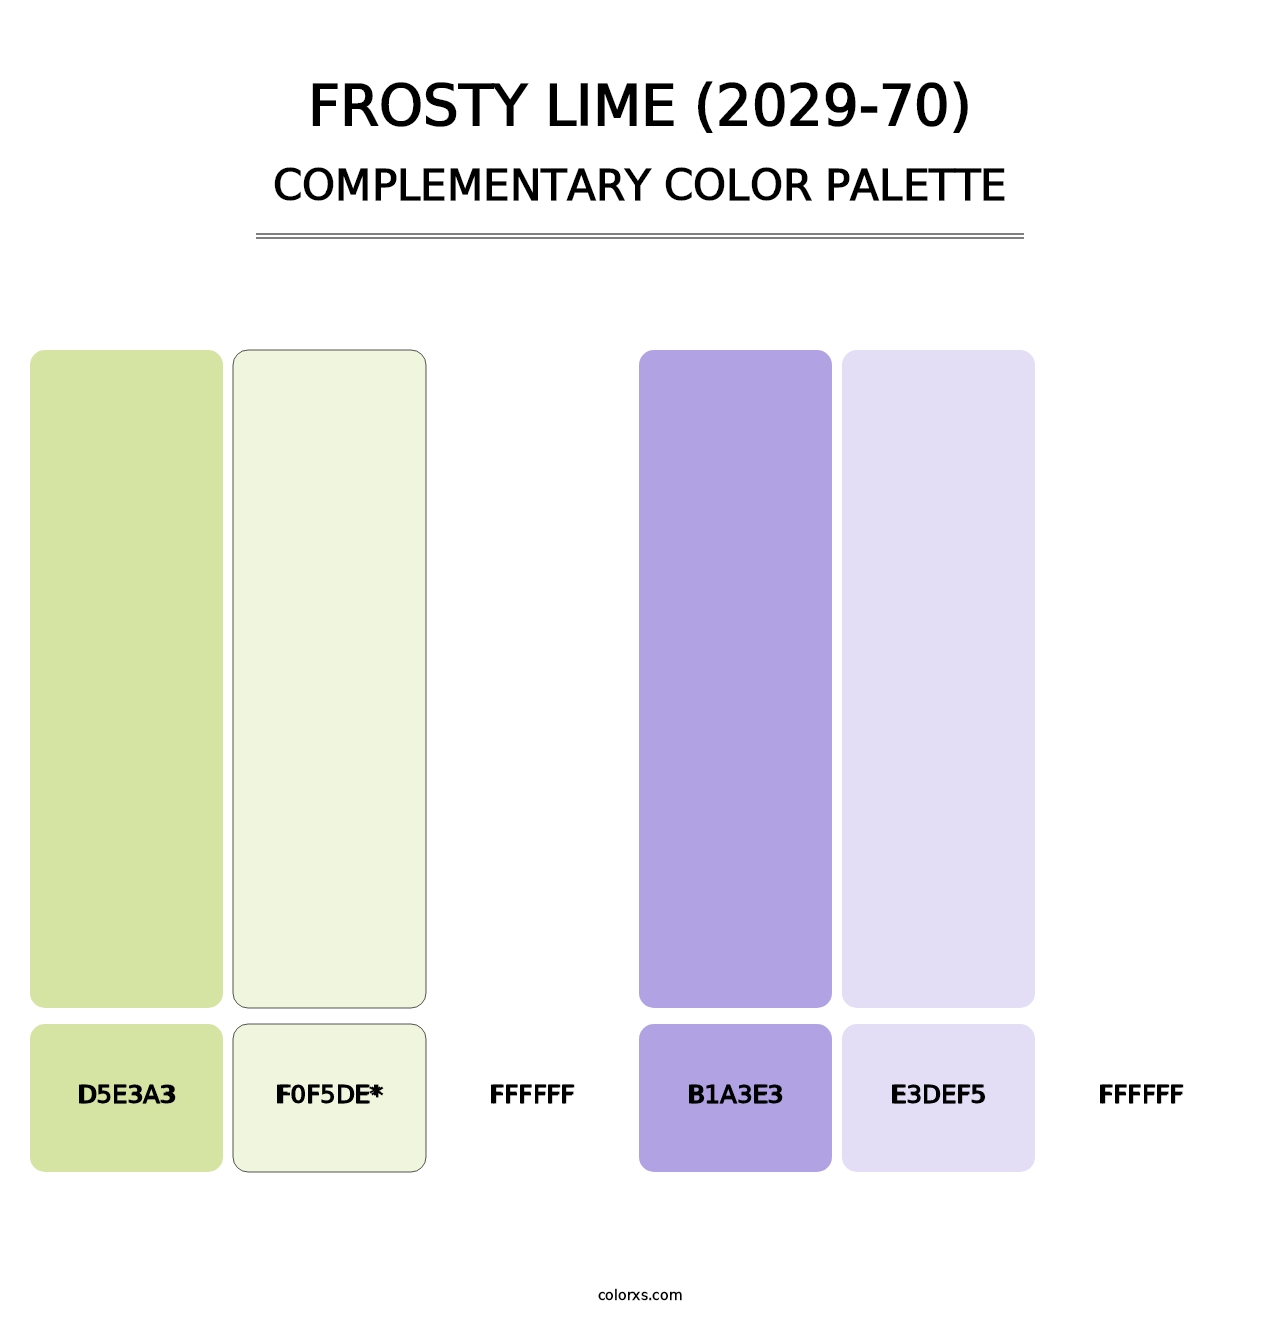 Frosty Lime (2029-70) - Complementary Color Palette